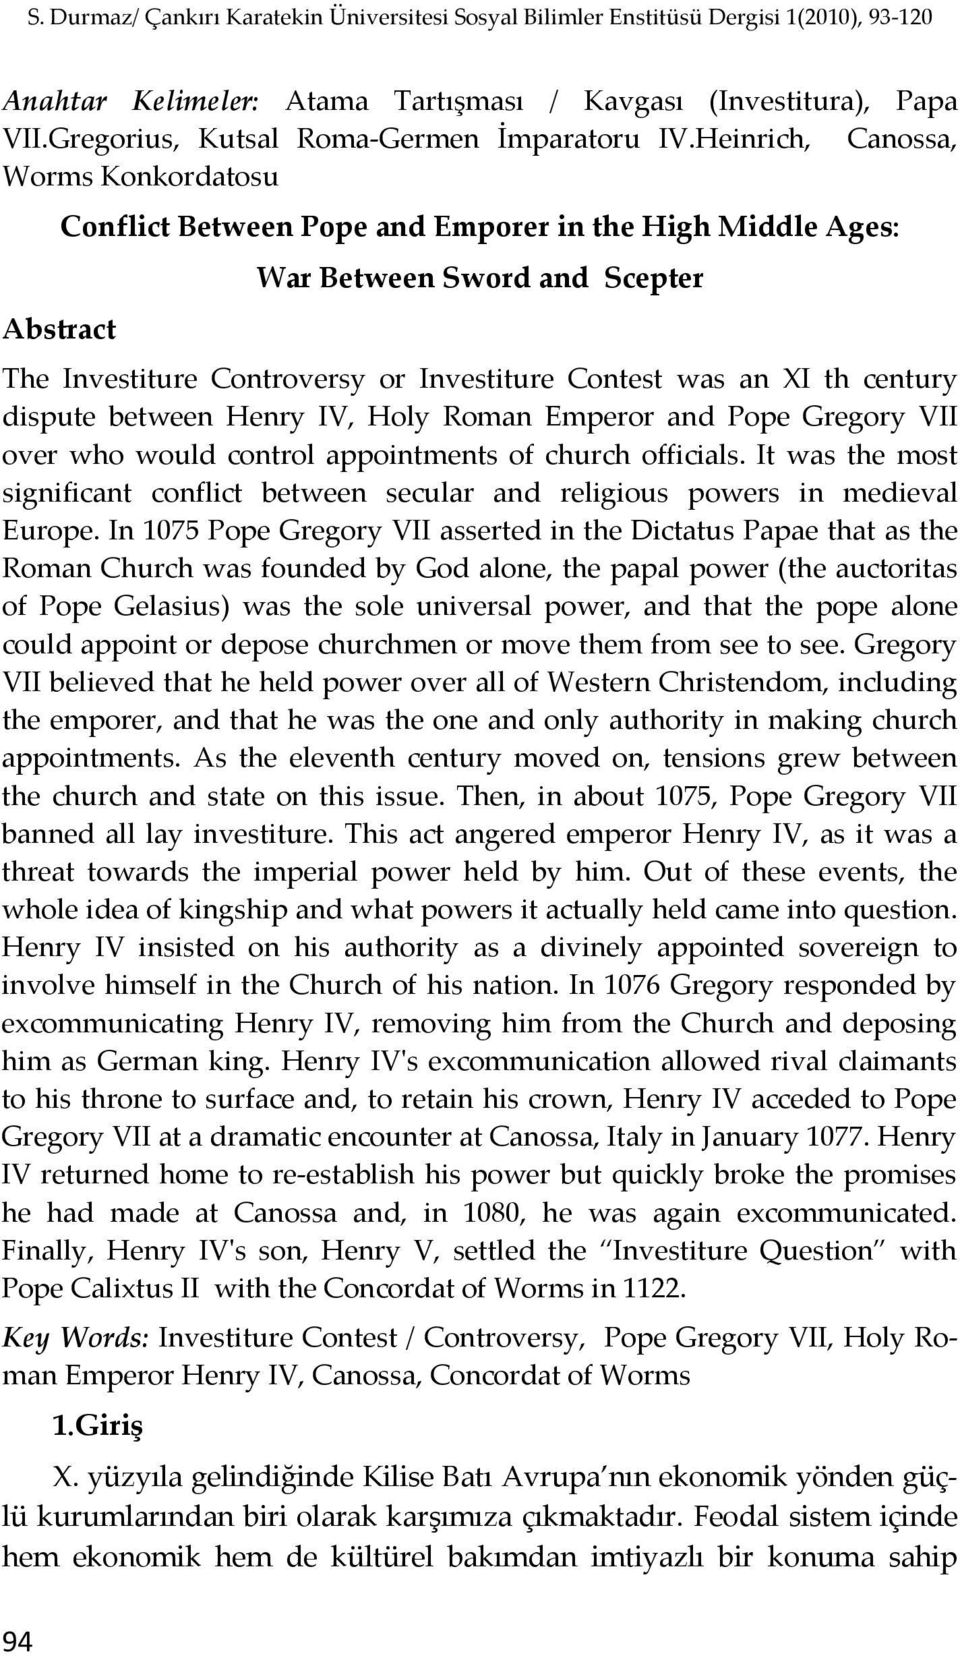 century dispute between Henry IV, Holy Roman Emperor and Pope Gregory VII over who would control appointments of church officials.